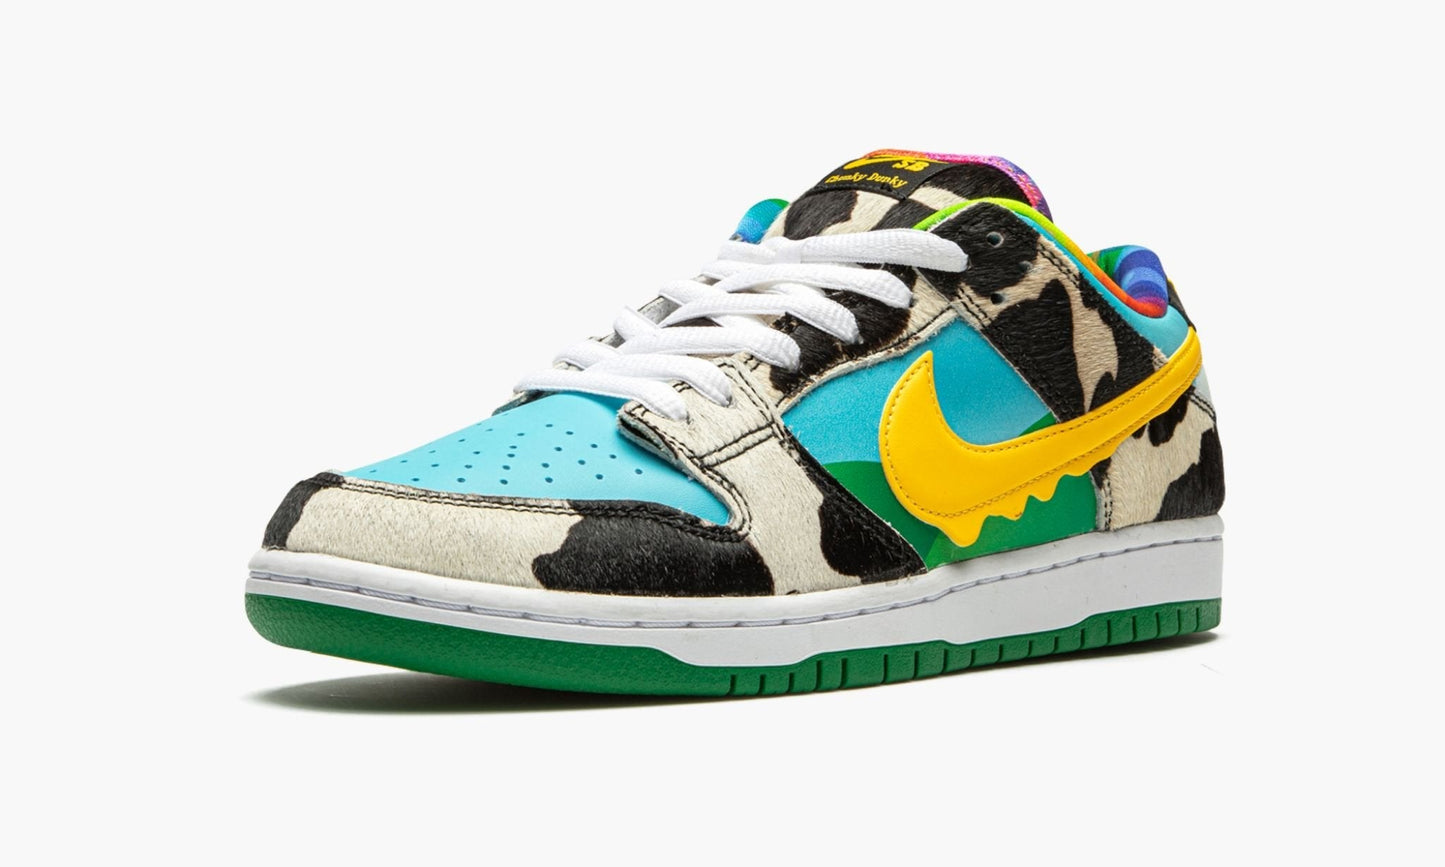 SB Dunk Low Special Box "Ben & Jerry's - Chunky Dunky"